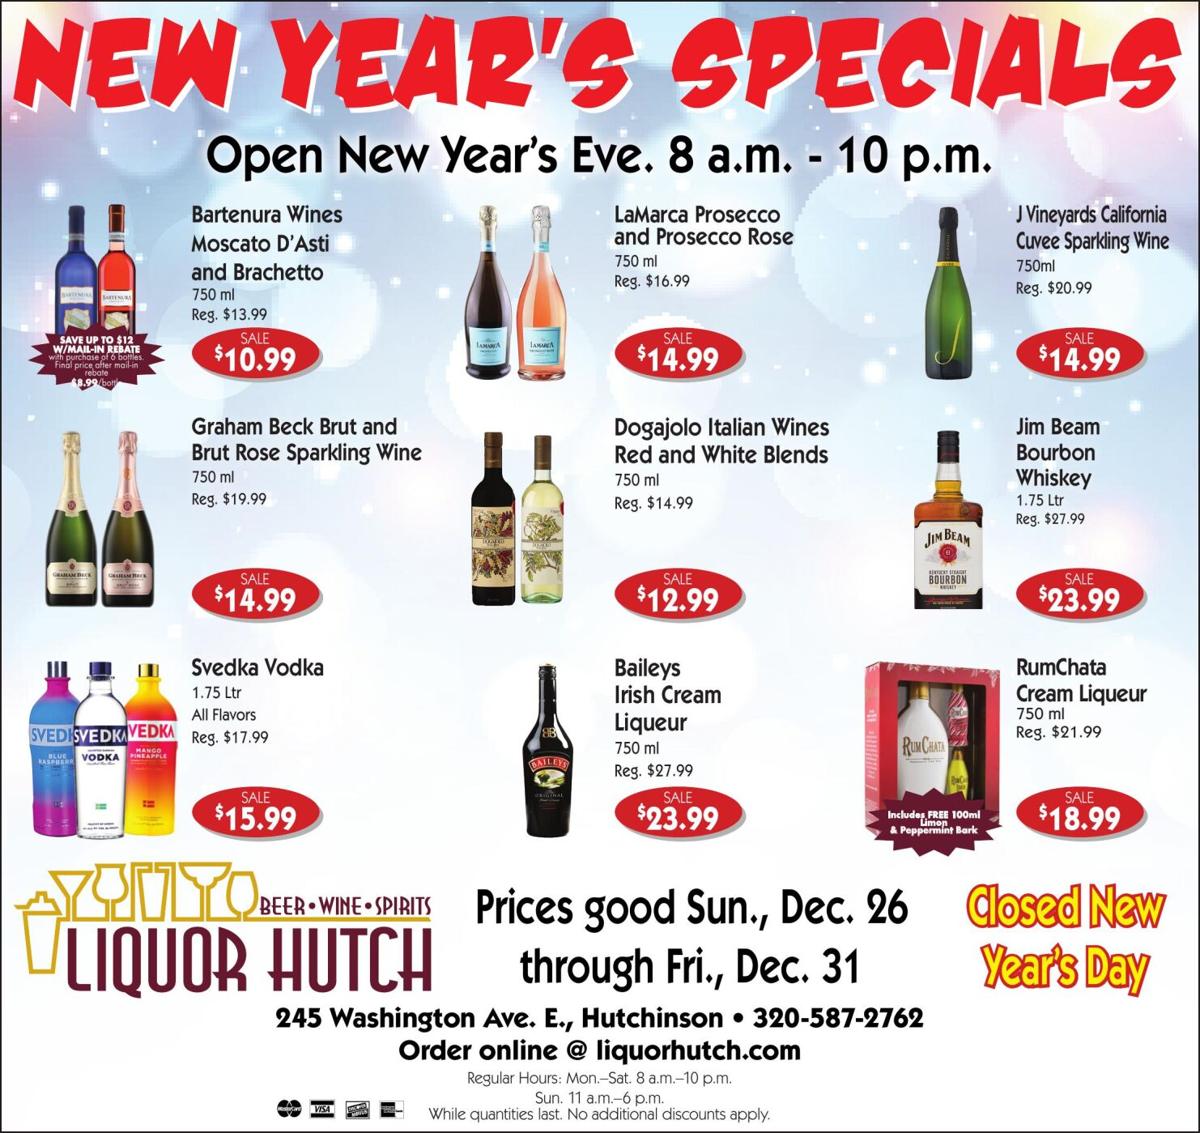 Open New Year’s Eve. 8 a.m. - 10 p.m.